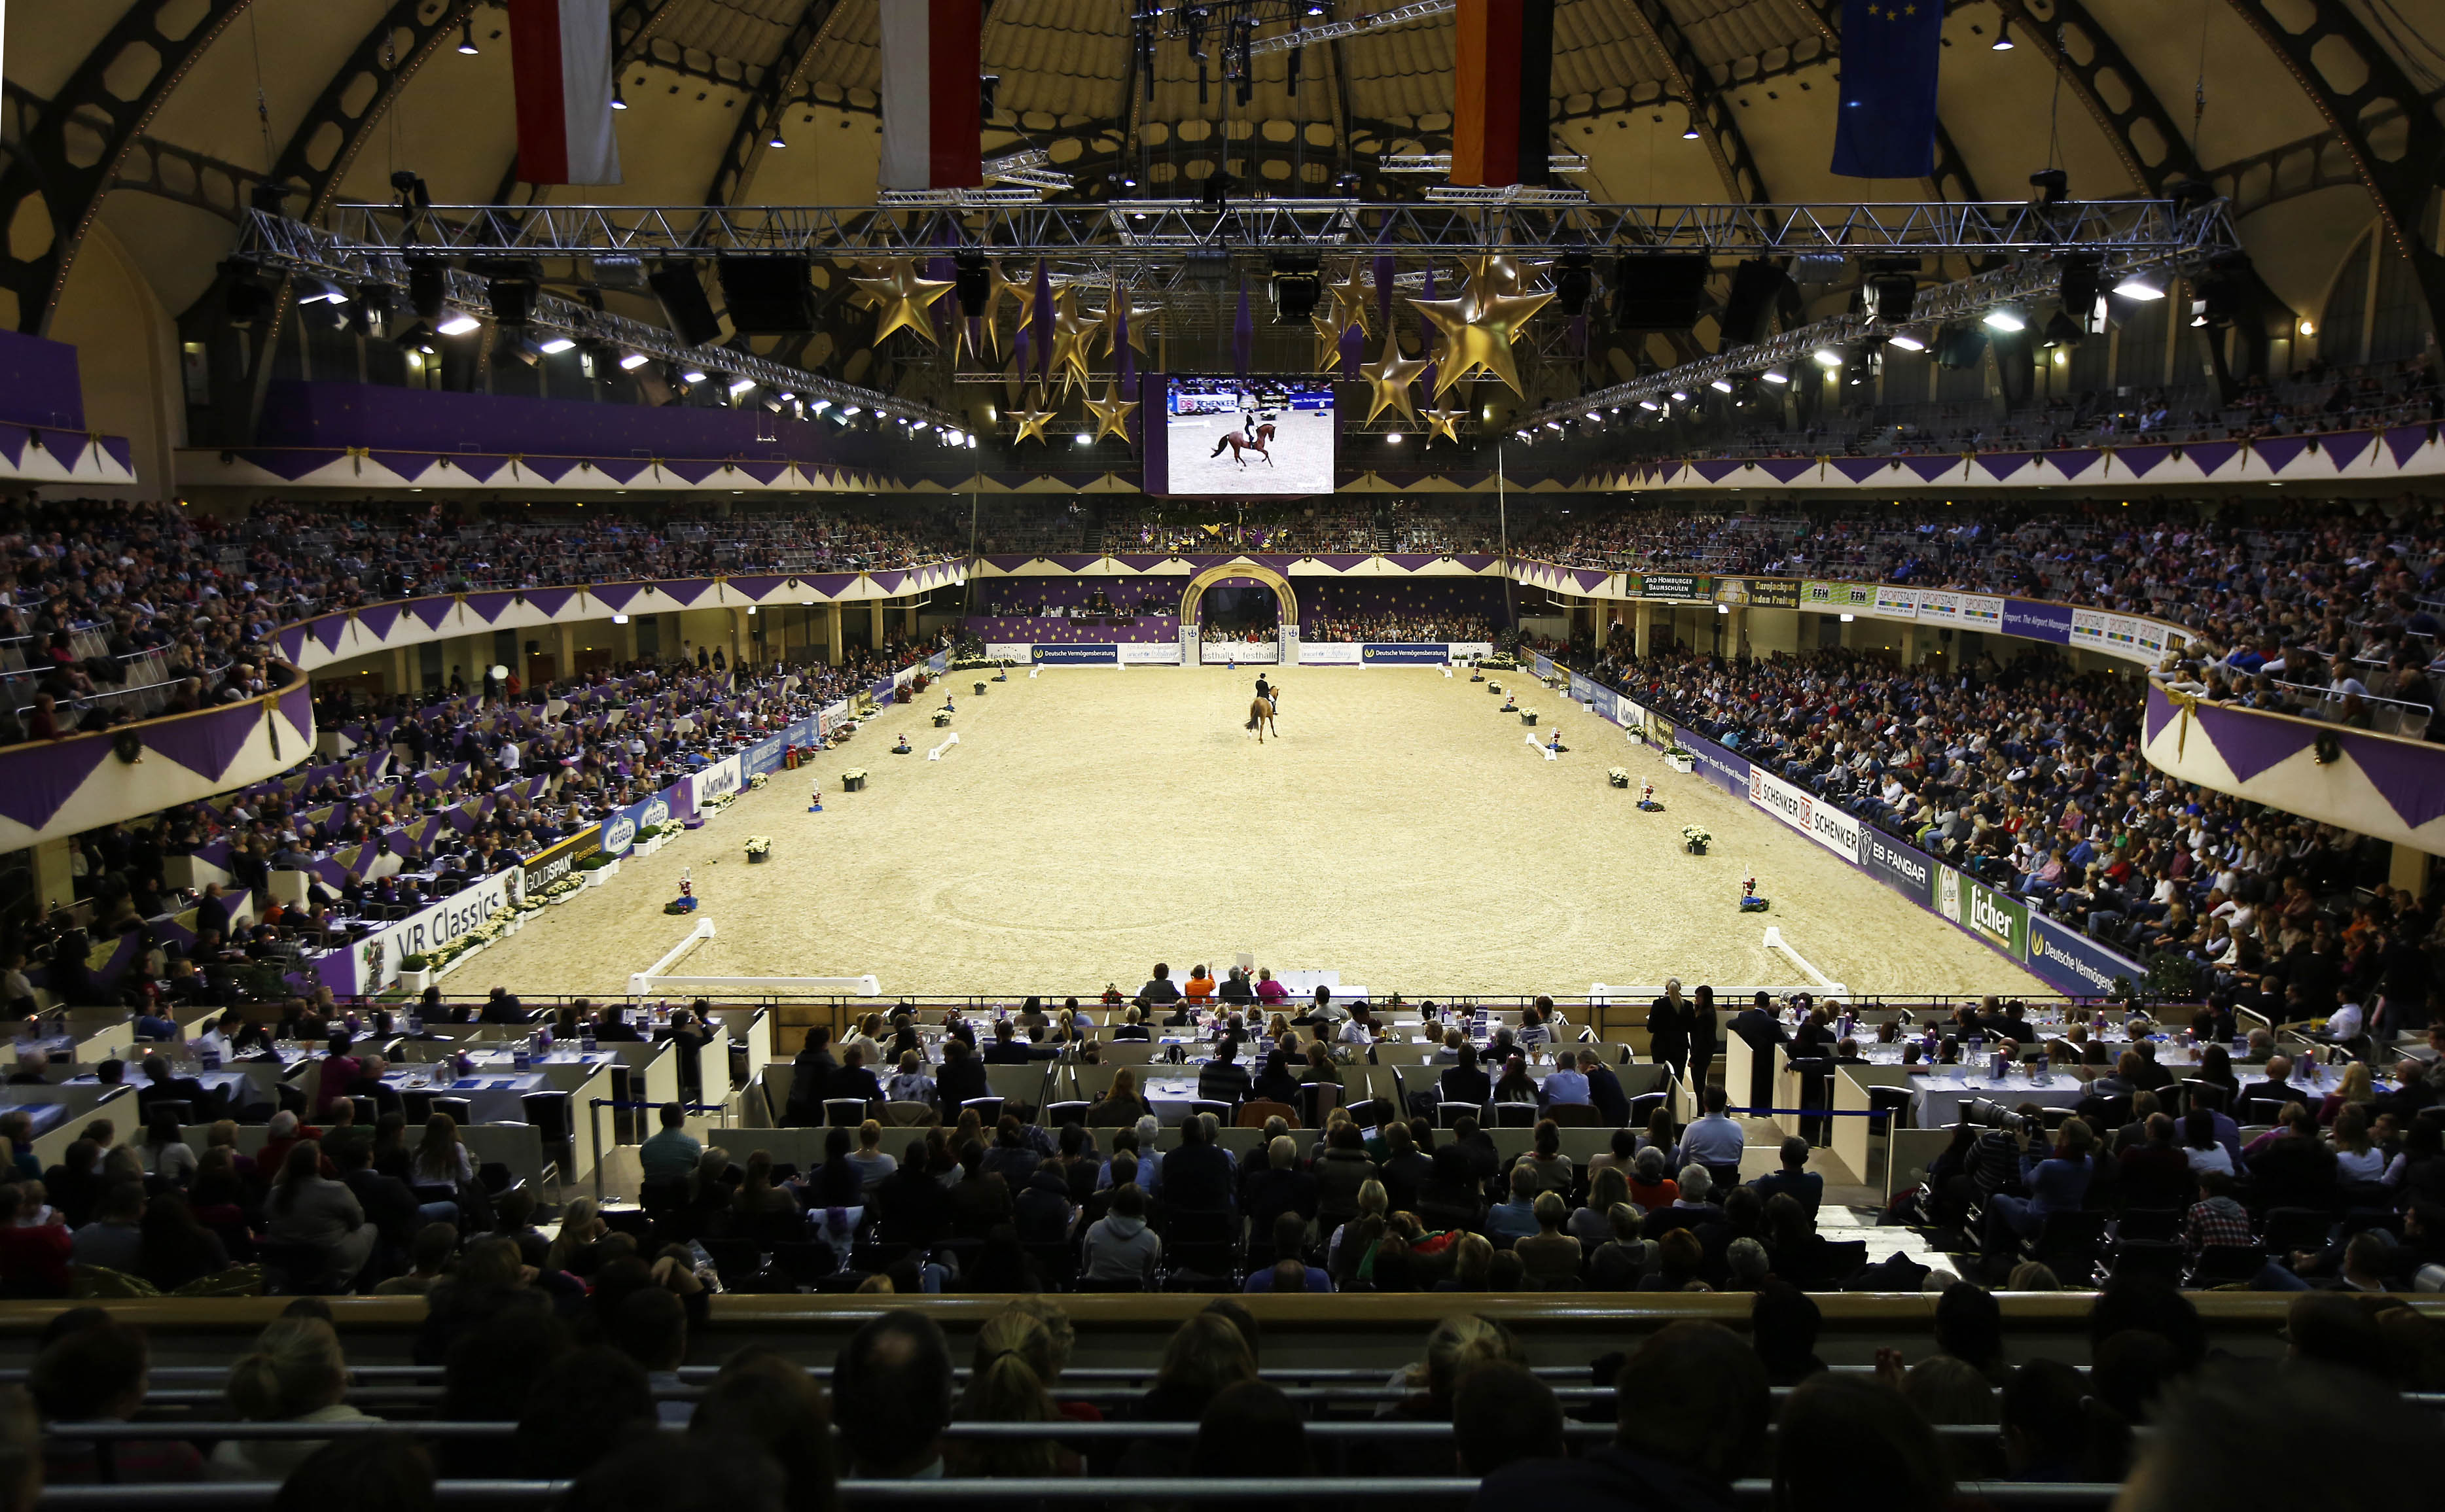 Festhalle - Horse riding contest